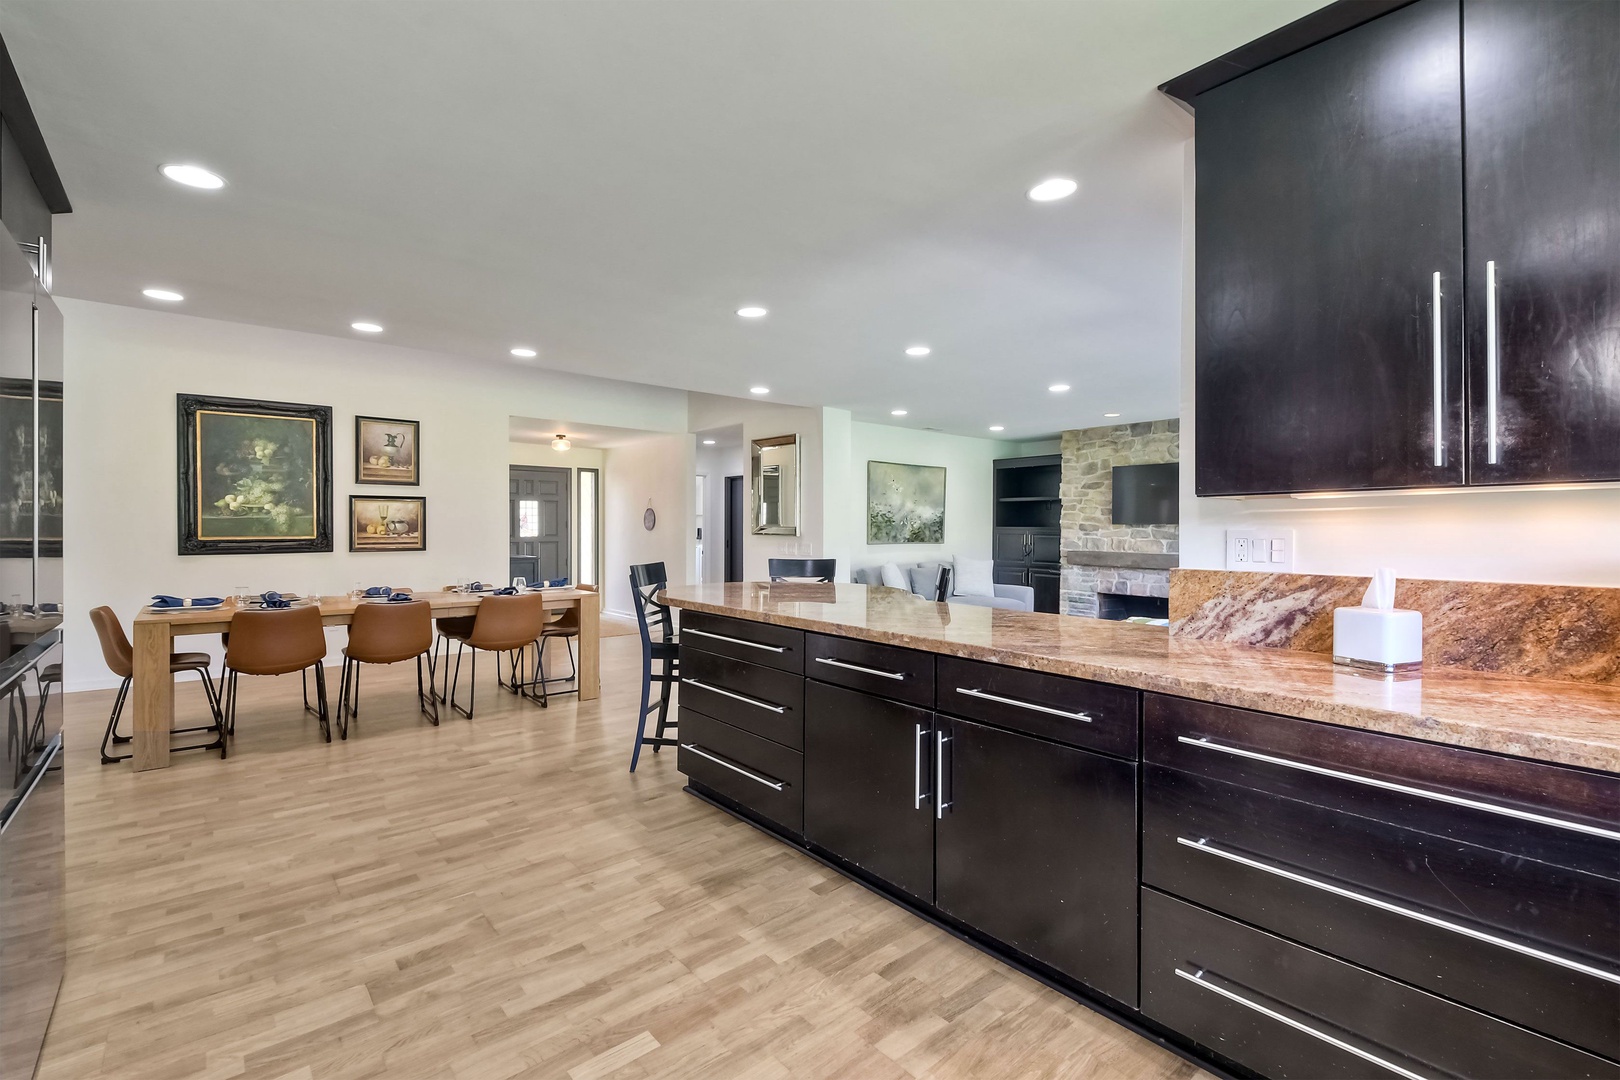 The sleek, open kitchen offers ample space & all the comforts of home